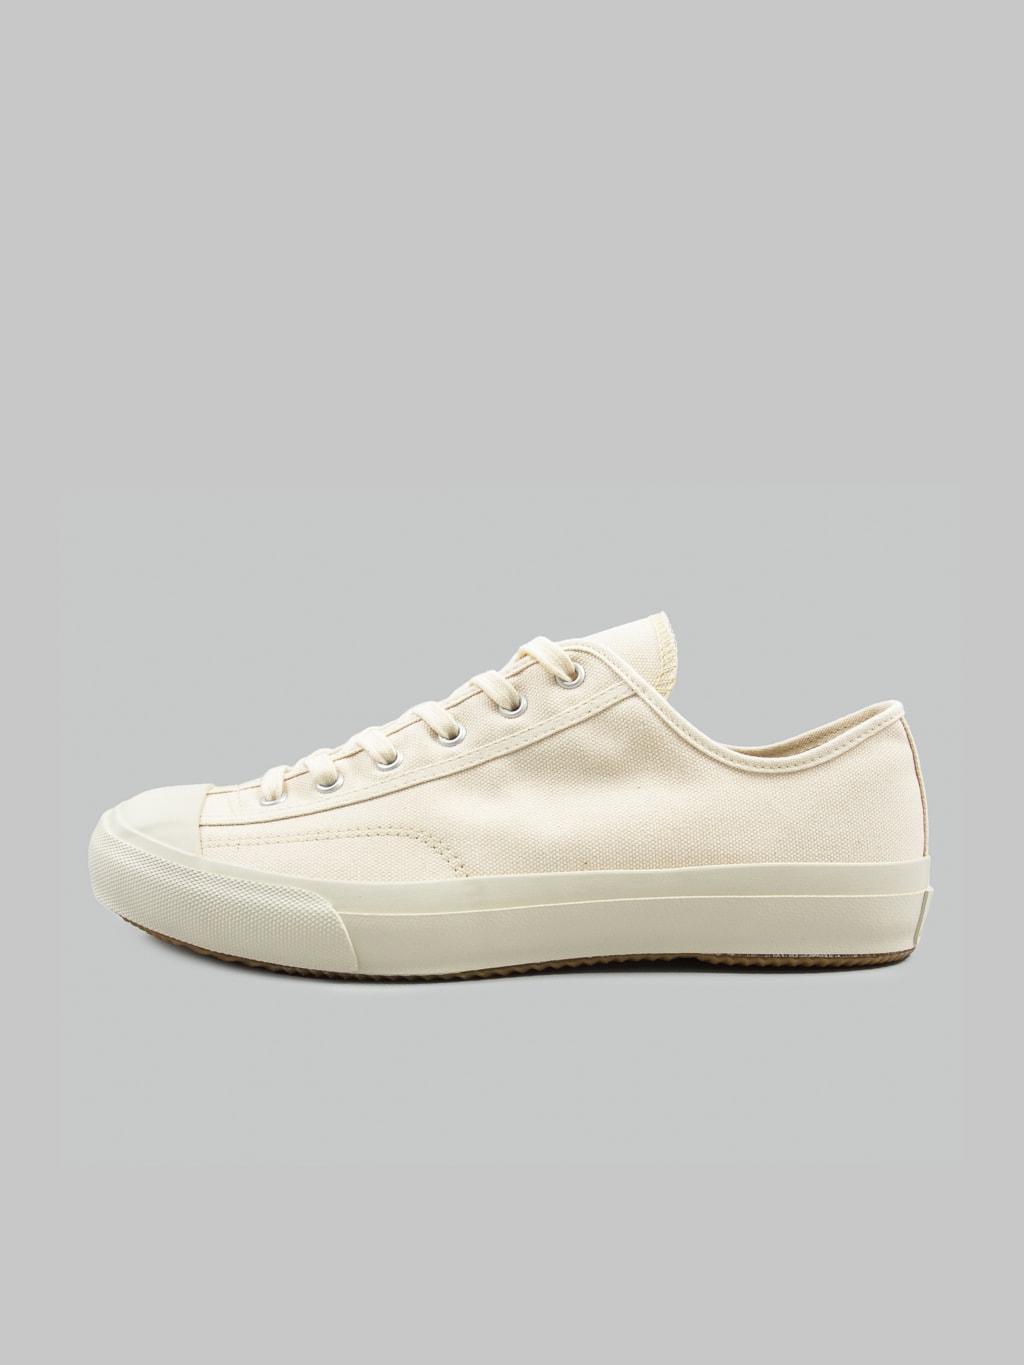 Moonstar Gym Classic White Sneakers japan made